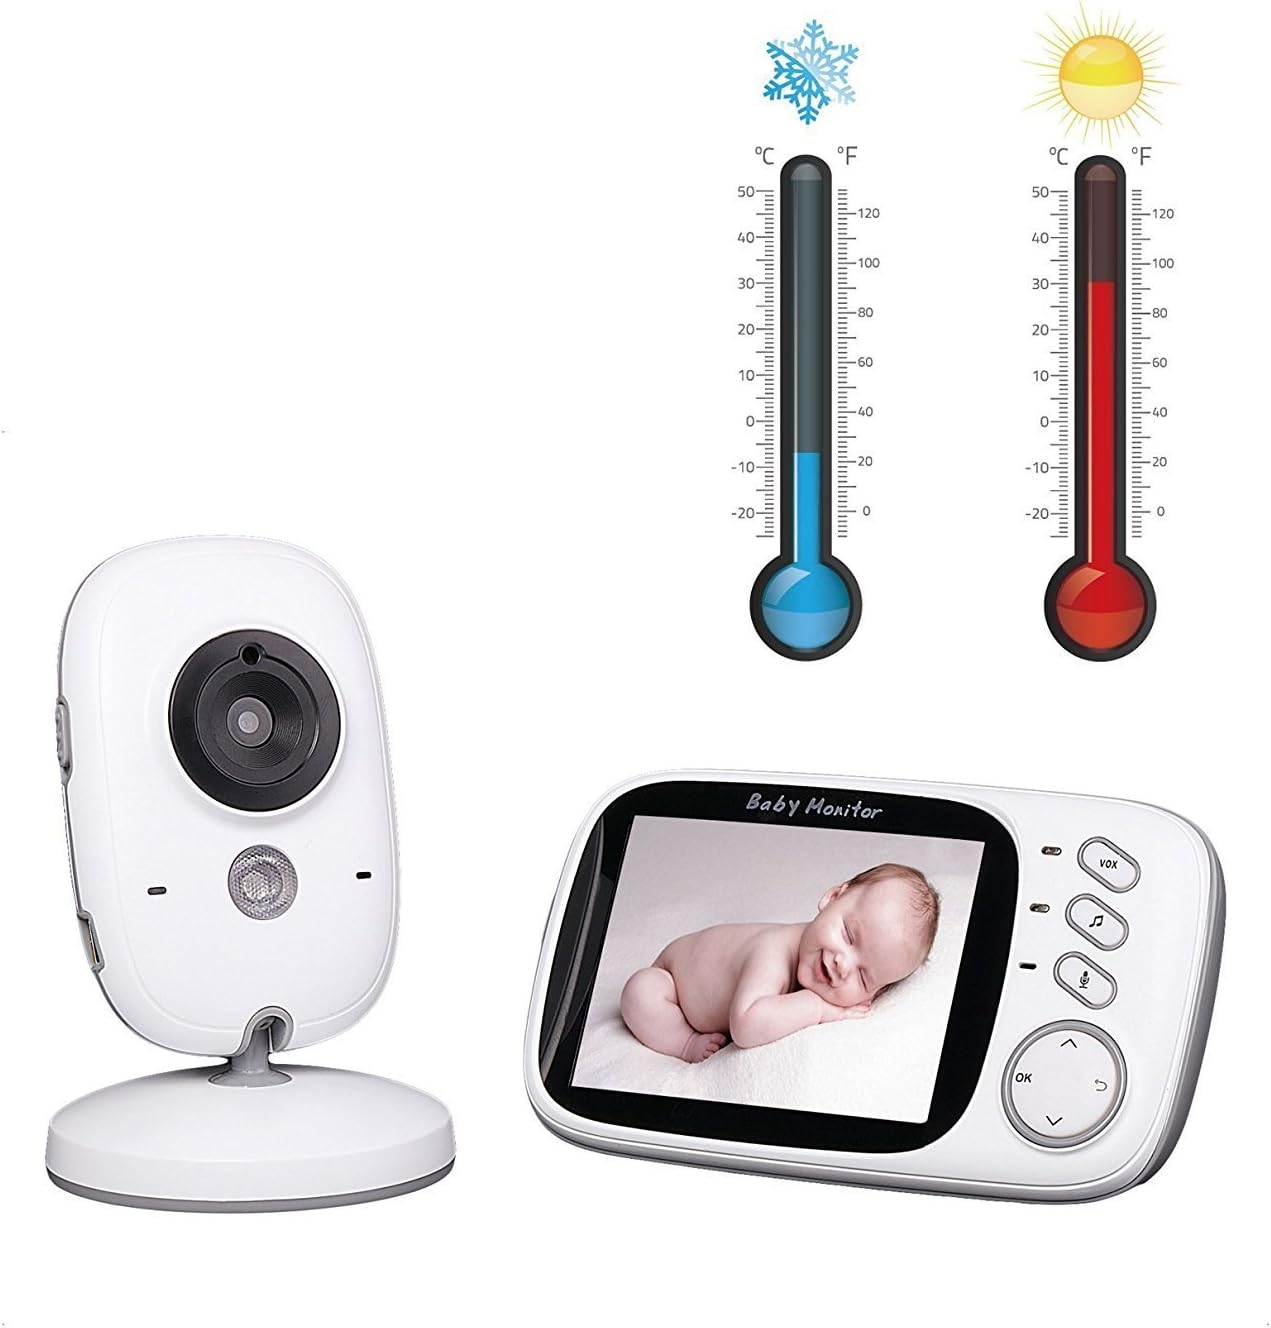 Hridz Video Baby Monitor Wireless Audio Monitor with Camera 3.2" LCD Baby Alarm Built-in Lullabies Night Vision Temperature Monitoring